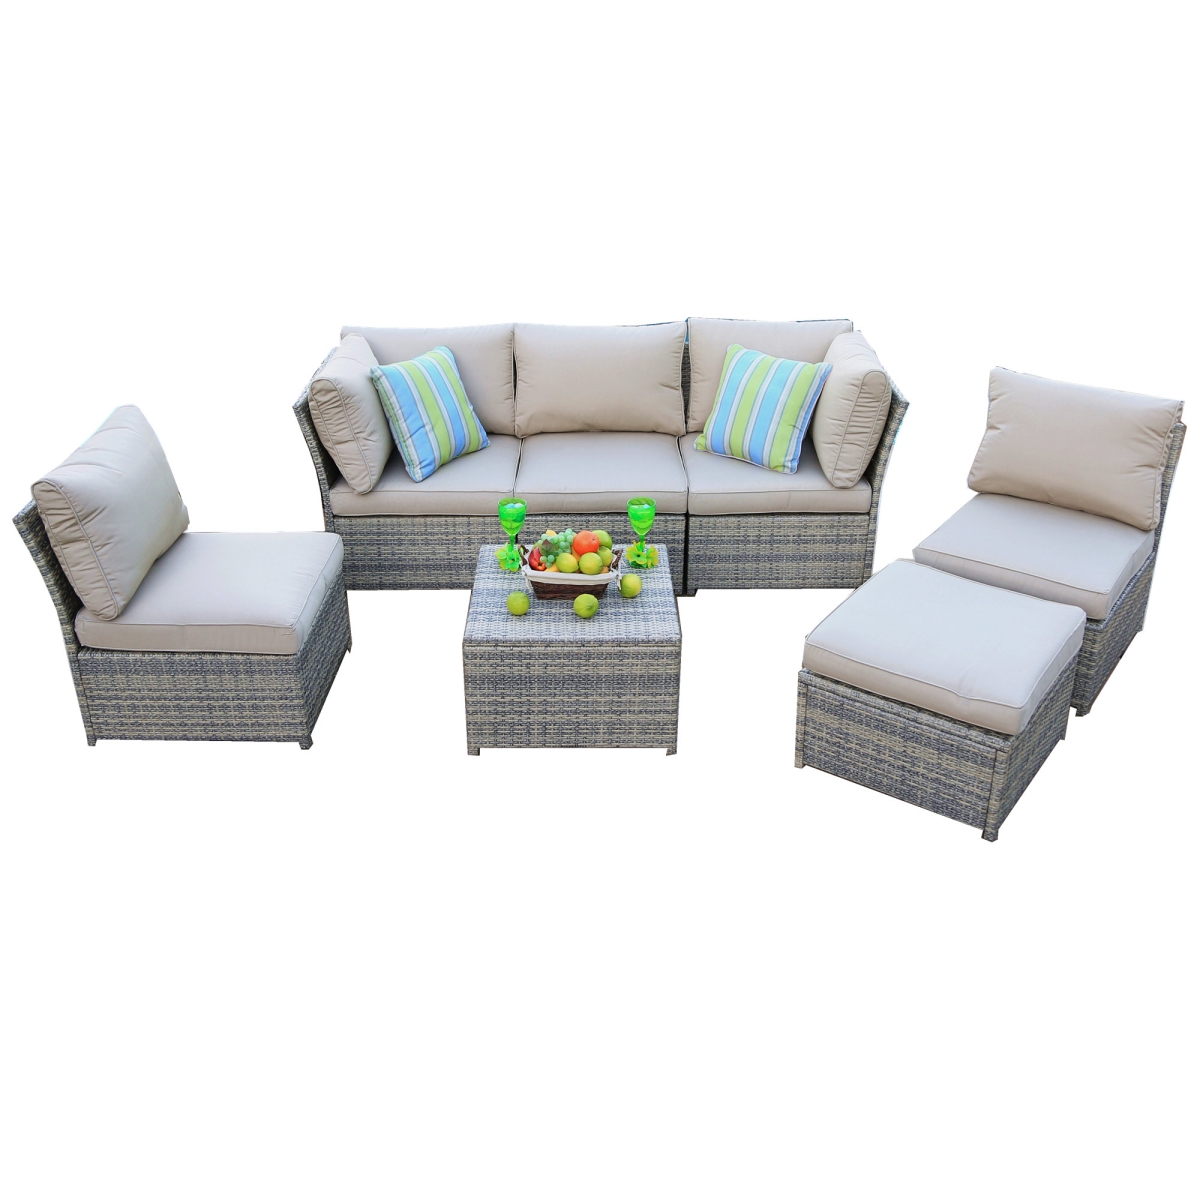 3032 Apple Valley Sectional Set - 7 Piece